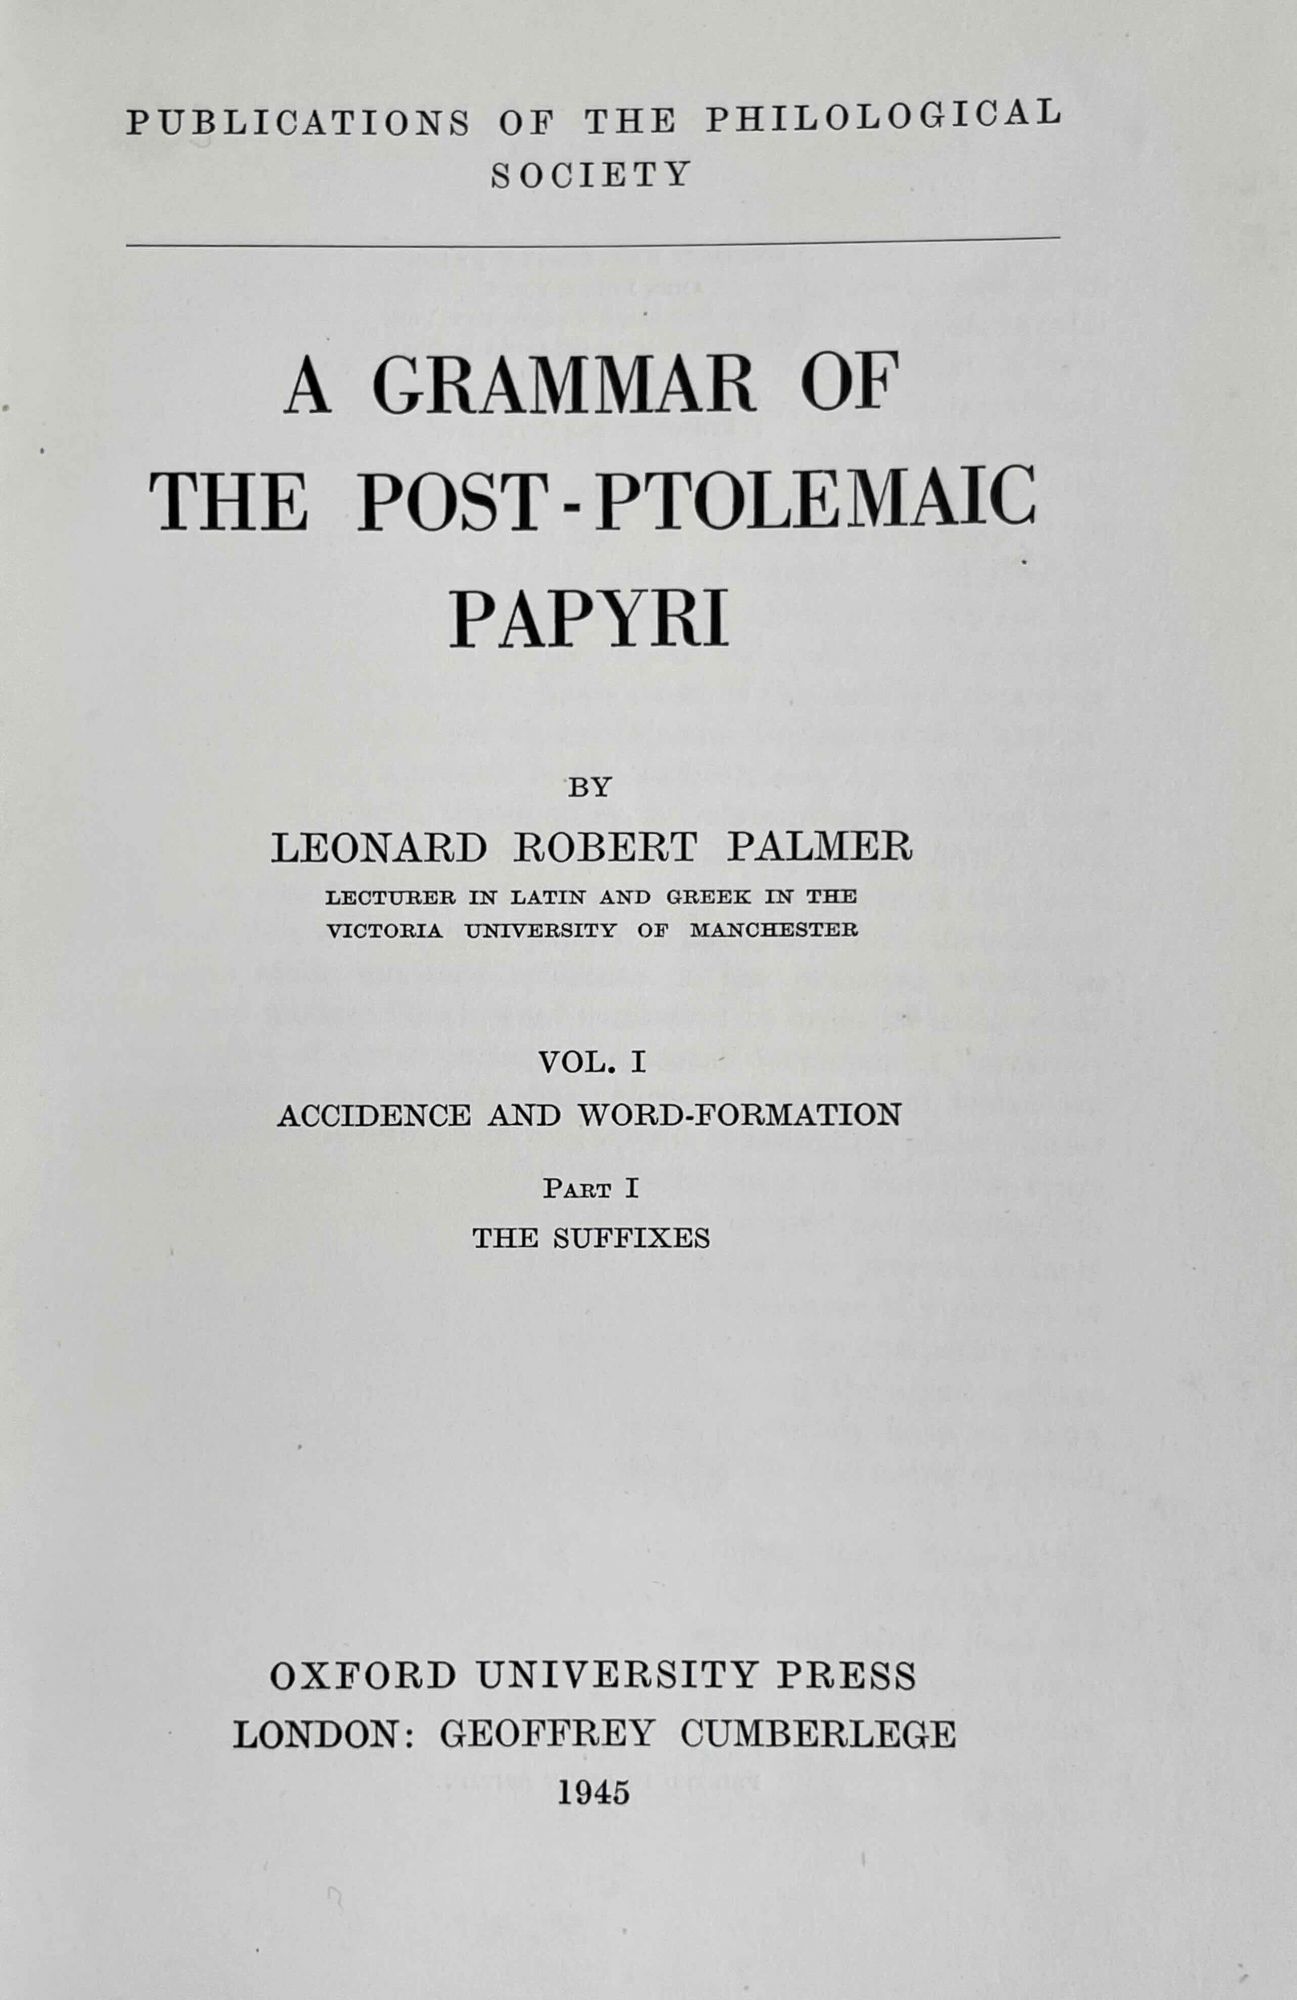 A grammar of the post-Ptolemaic papyri. Vol. I. Accidence and word-formation:  pt. 1. The suffixes (all published) by PALMER Leonard R.